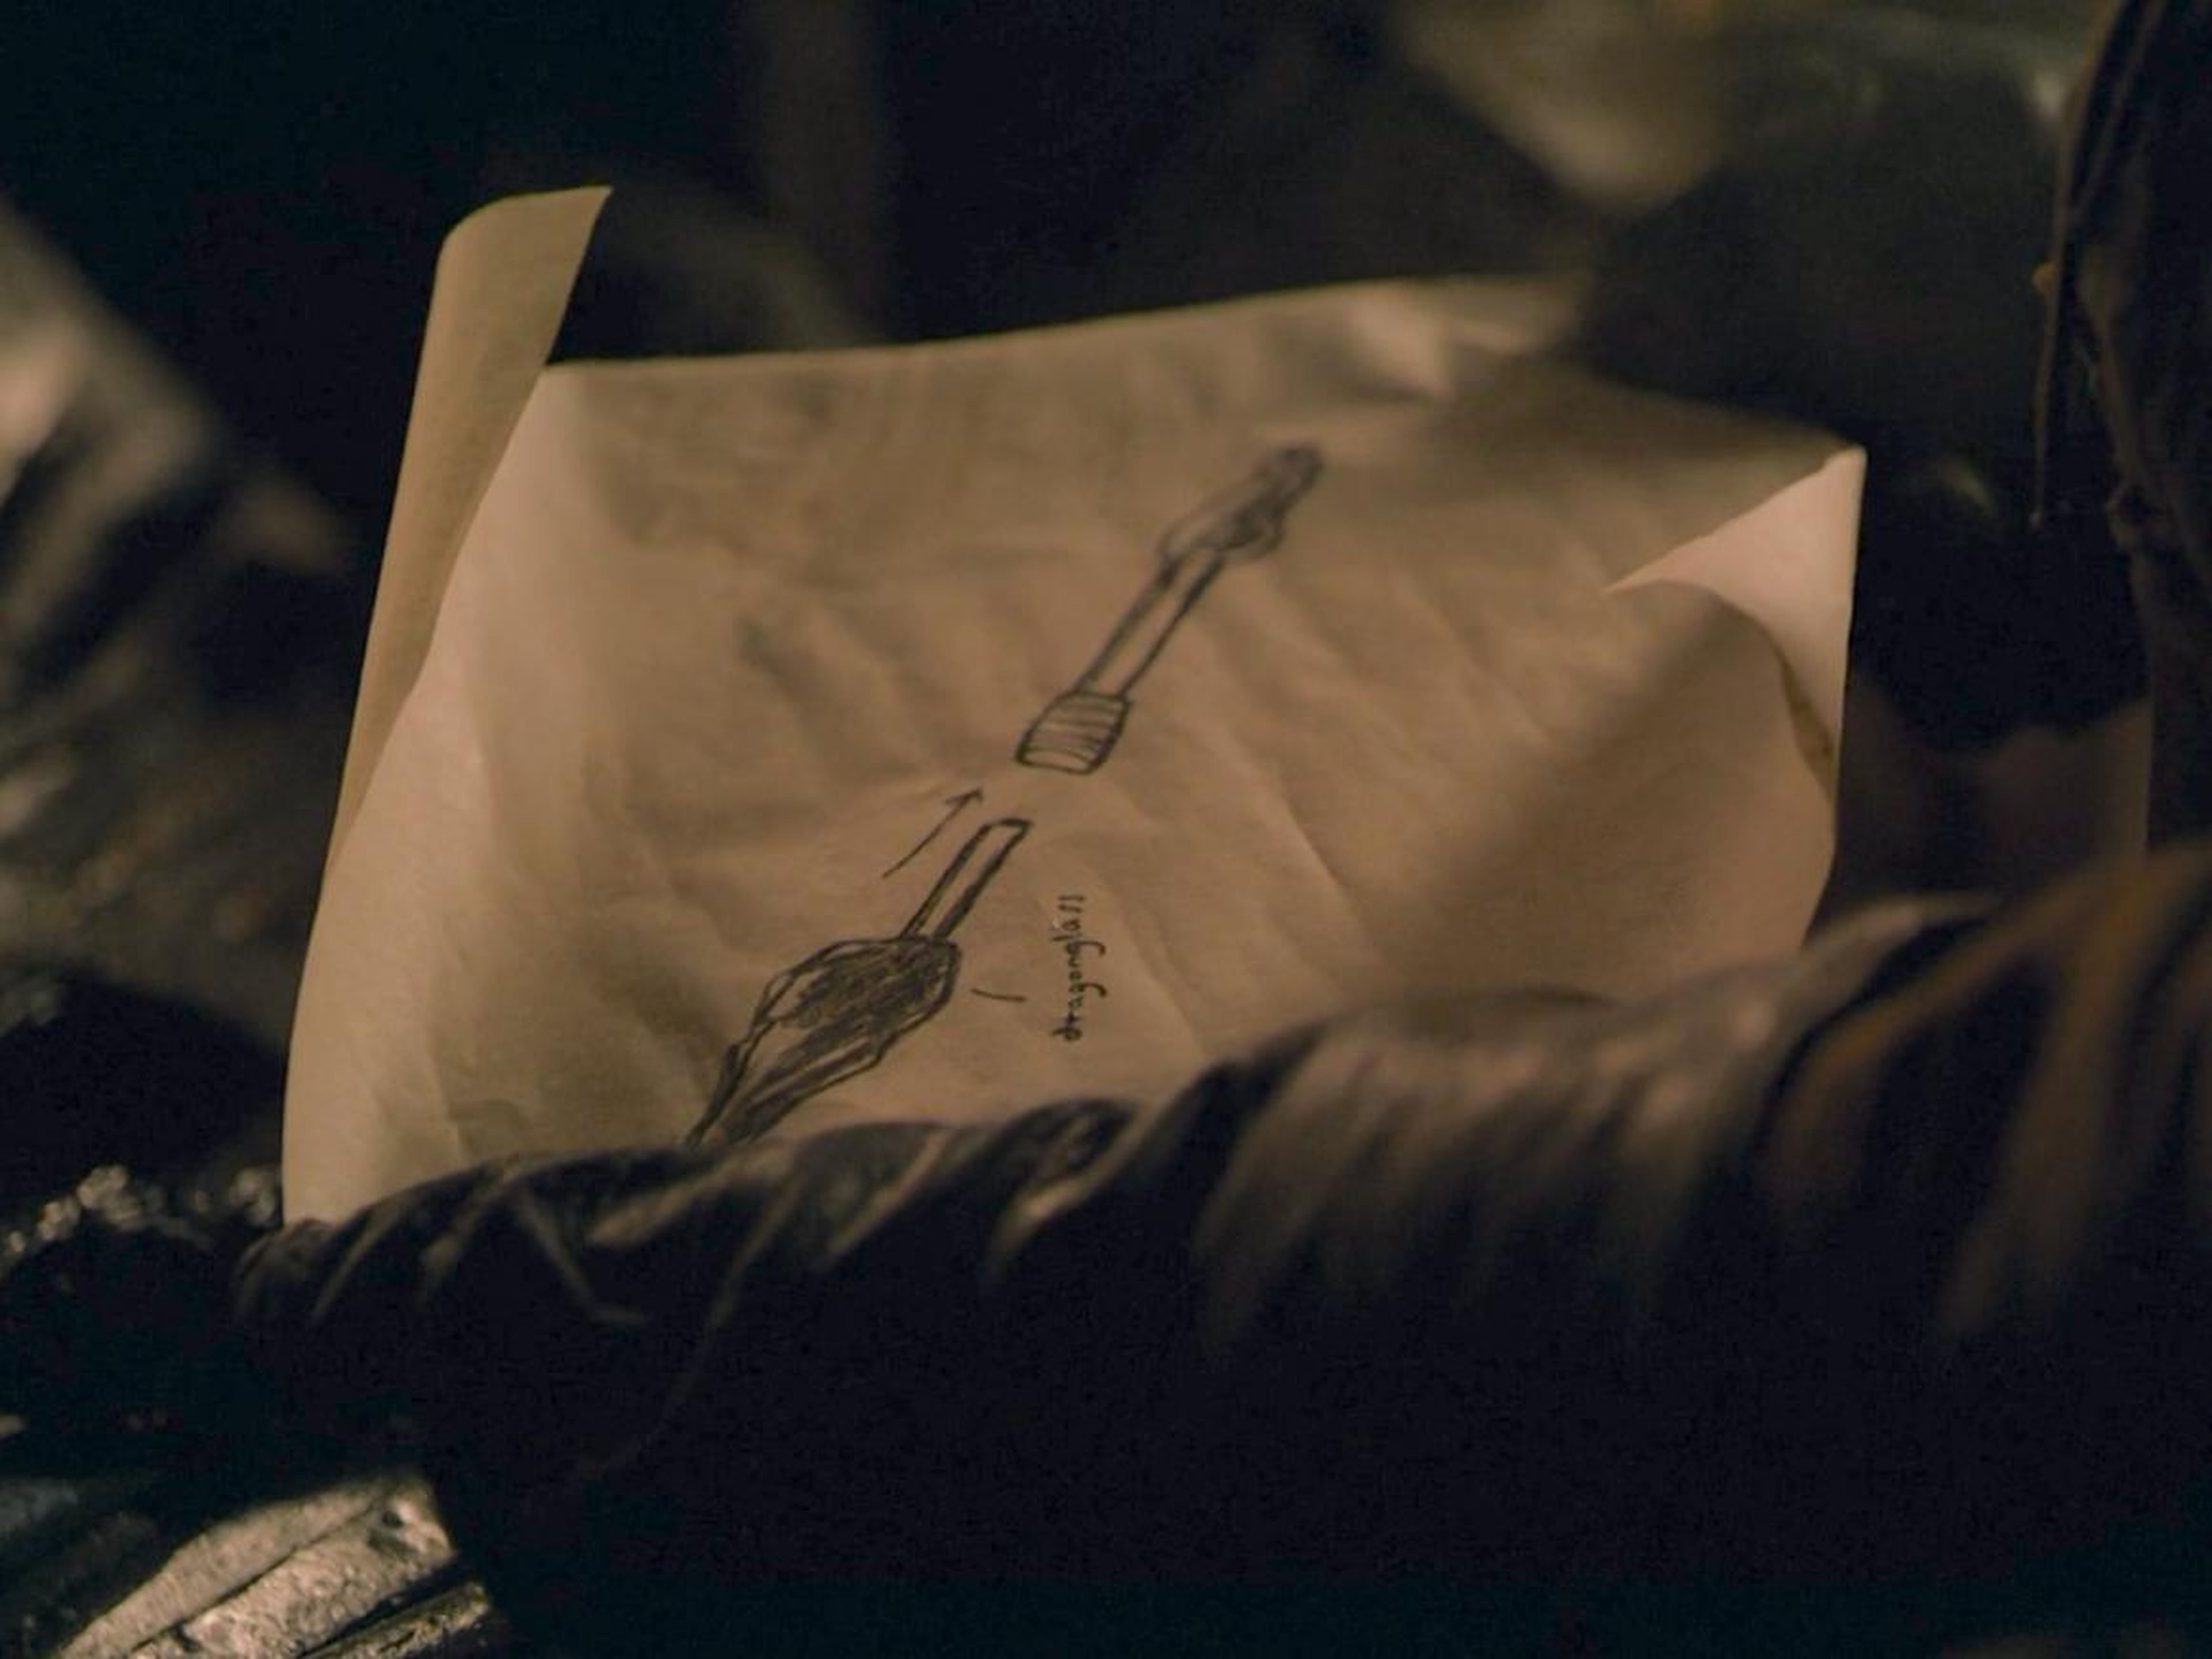 Here's the diagram of Arya's new weapon.